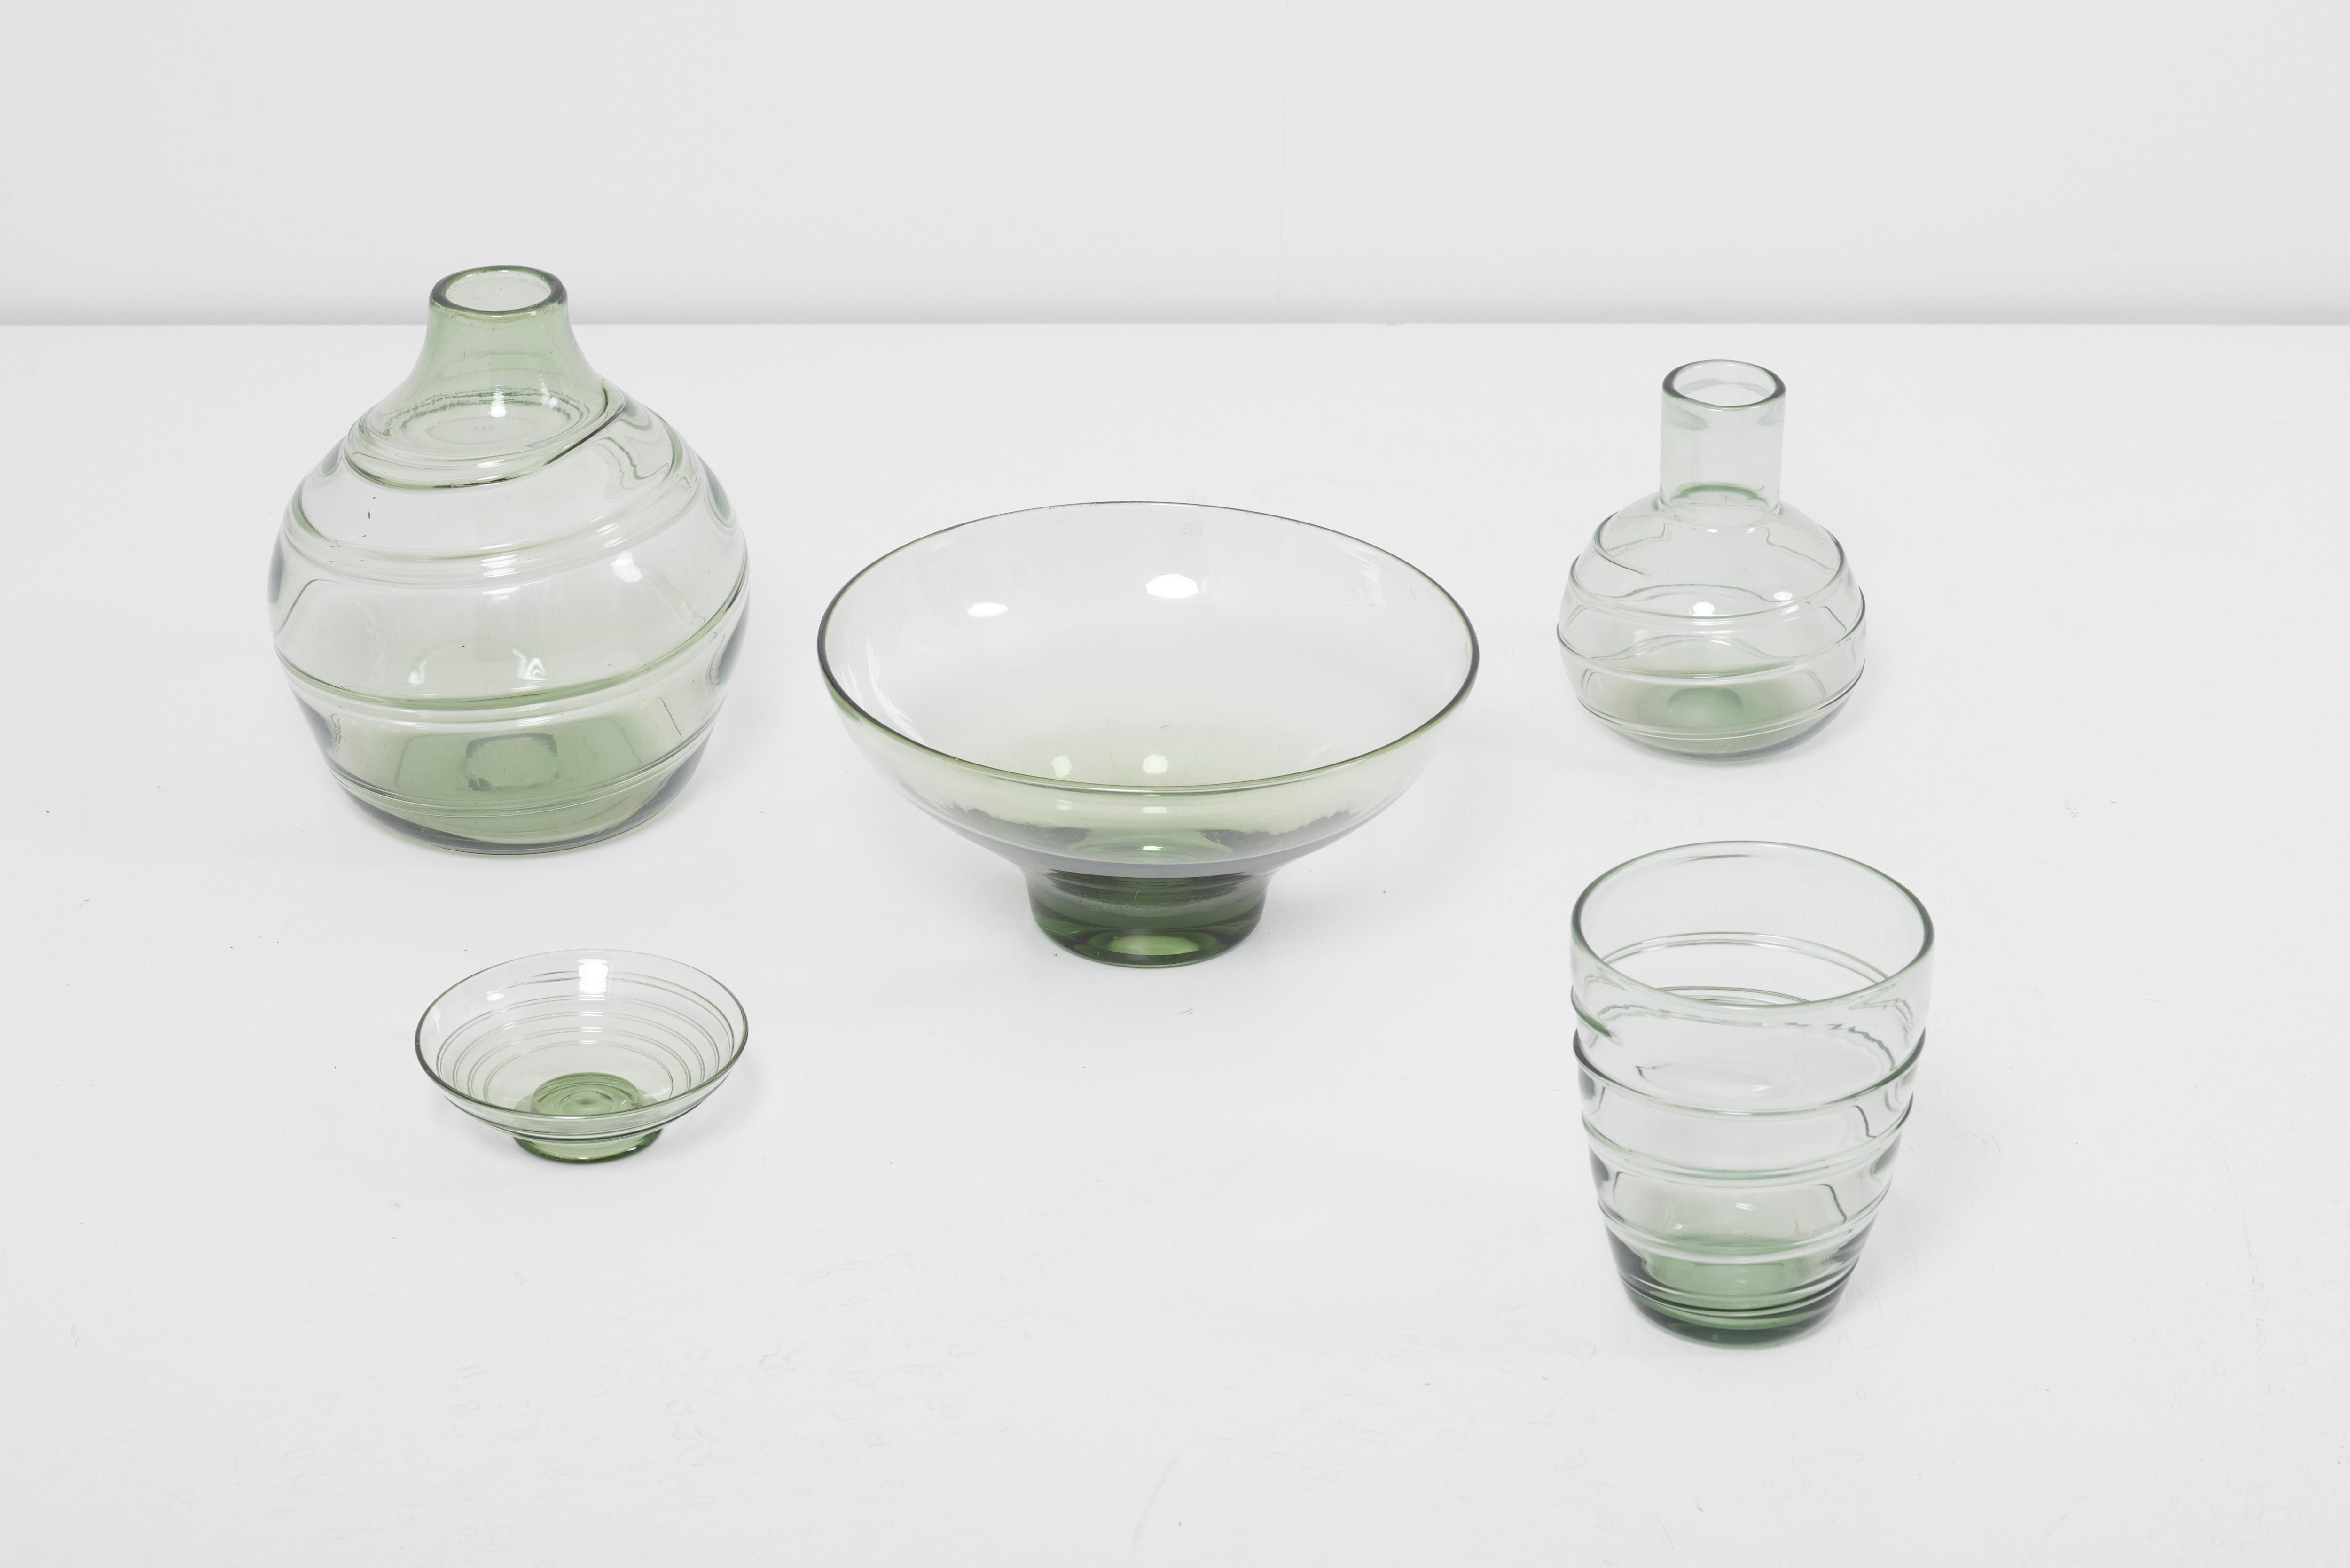 Collection of ribbon-trailed glass vases and bowls in green.
Designed 1930s by Barnaby Powell for Whitefriars, UK.
The dimensions given apply to the largest vase.